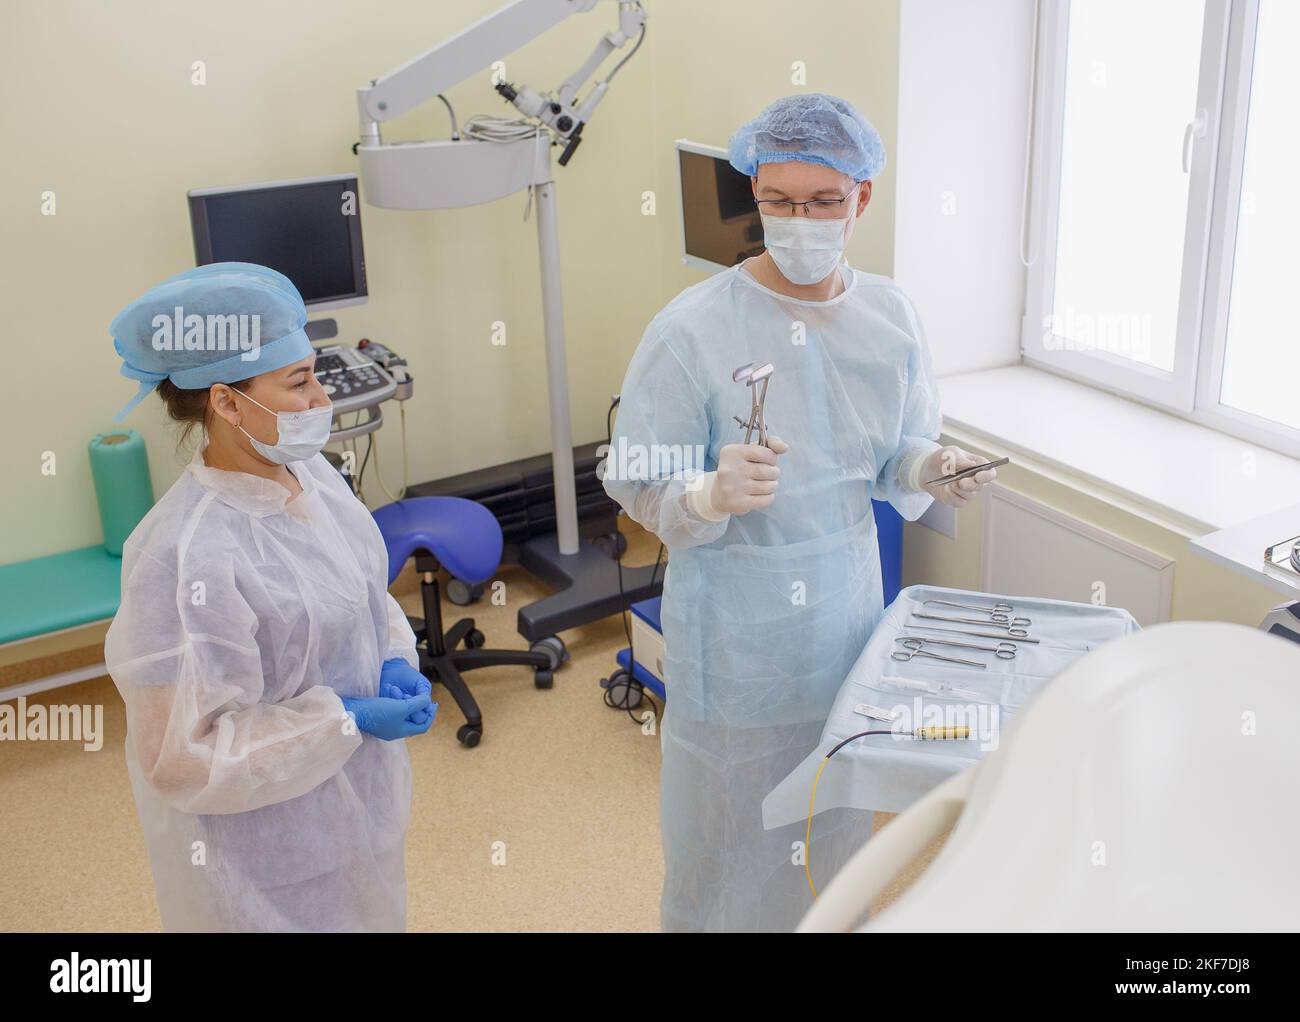 a proctologist prepares expansion instruments for surgery in the proctological operating room. Stock Photo